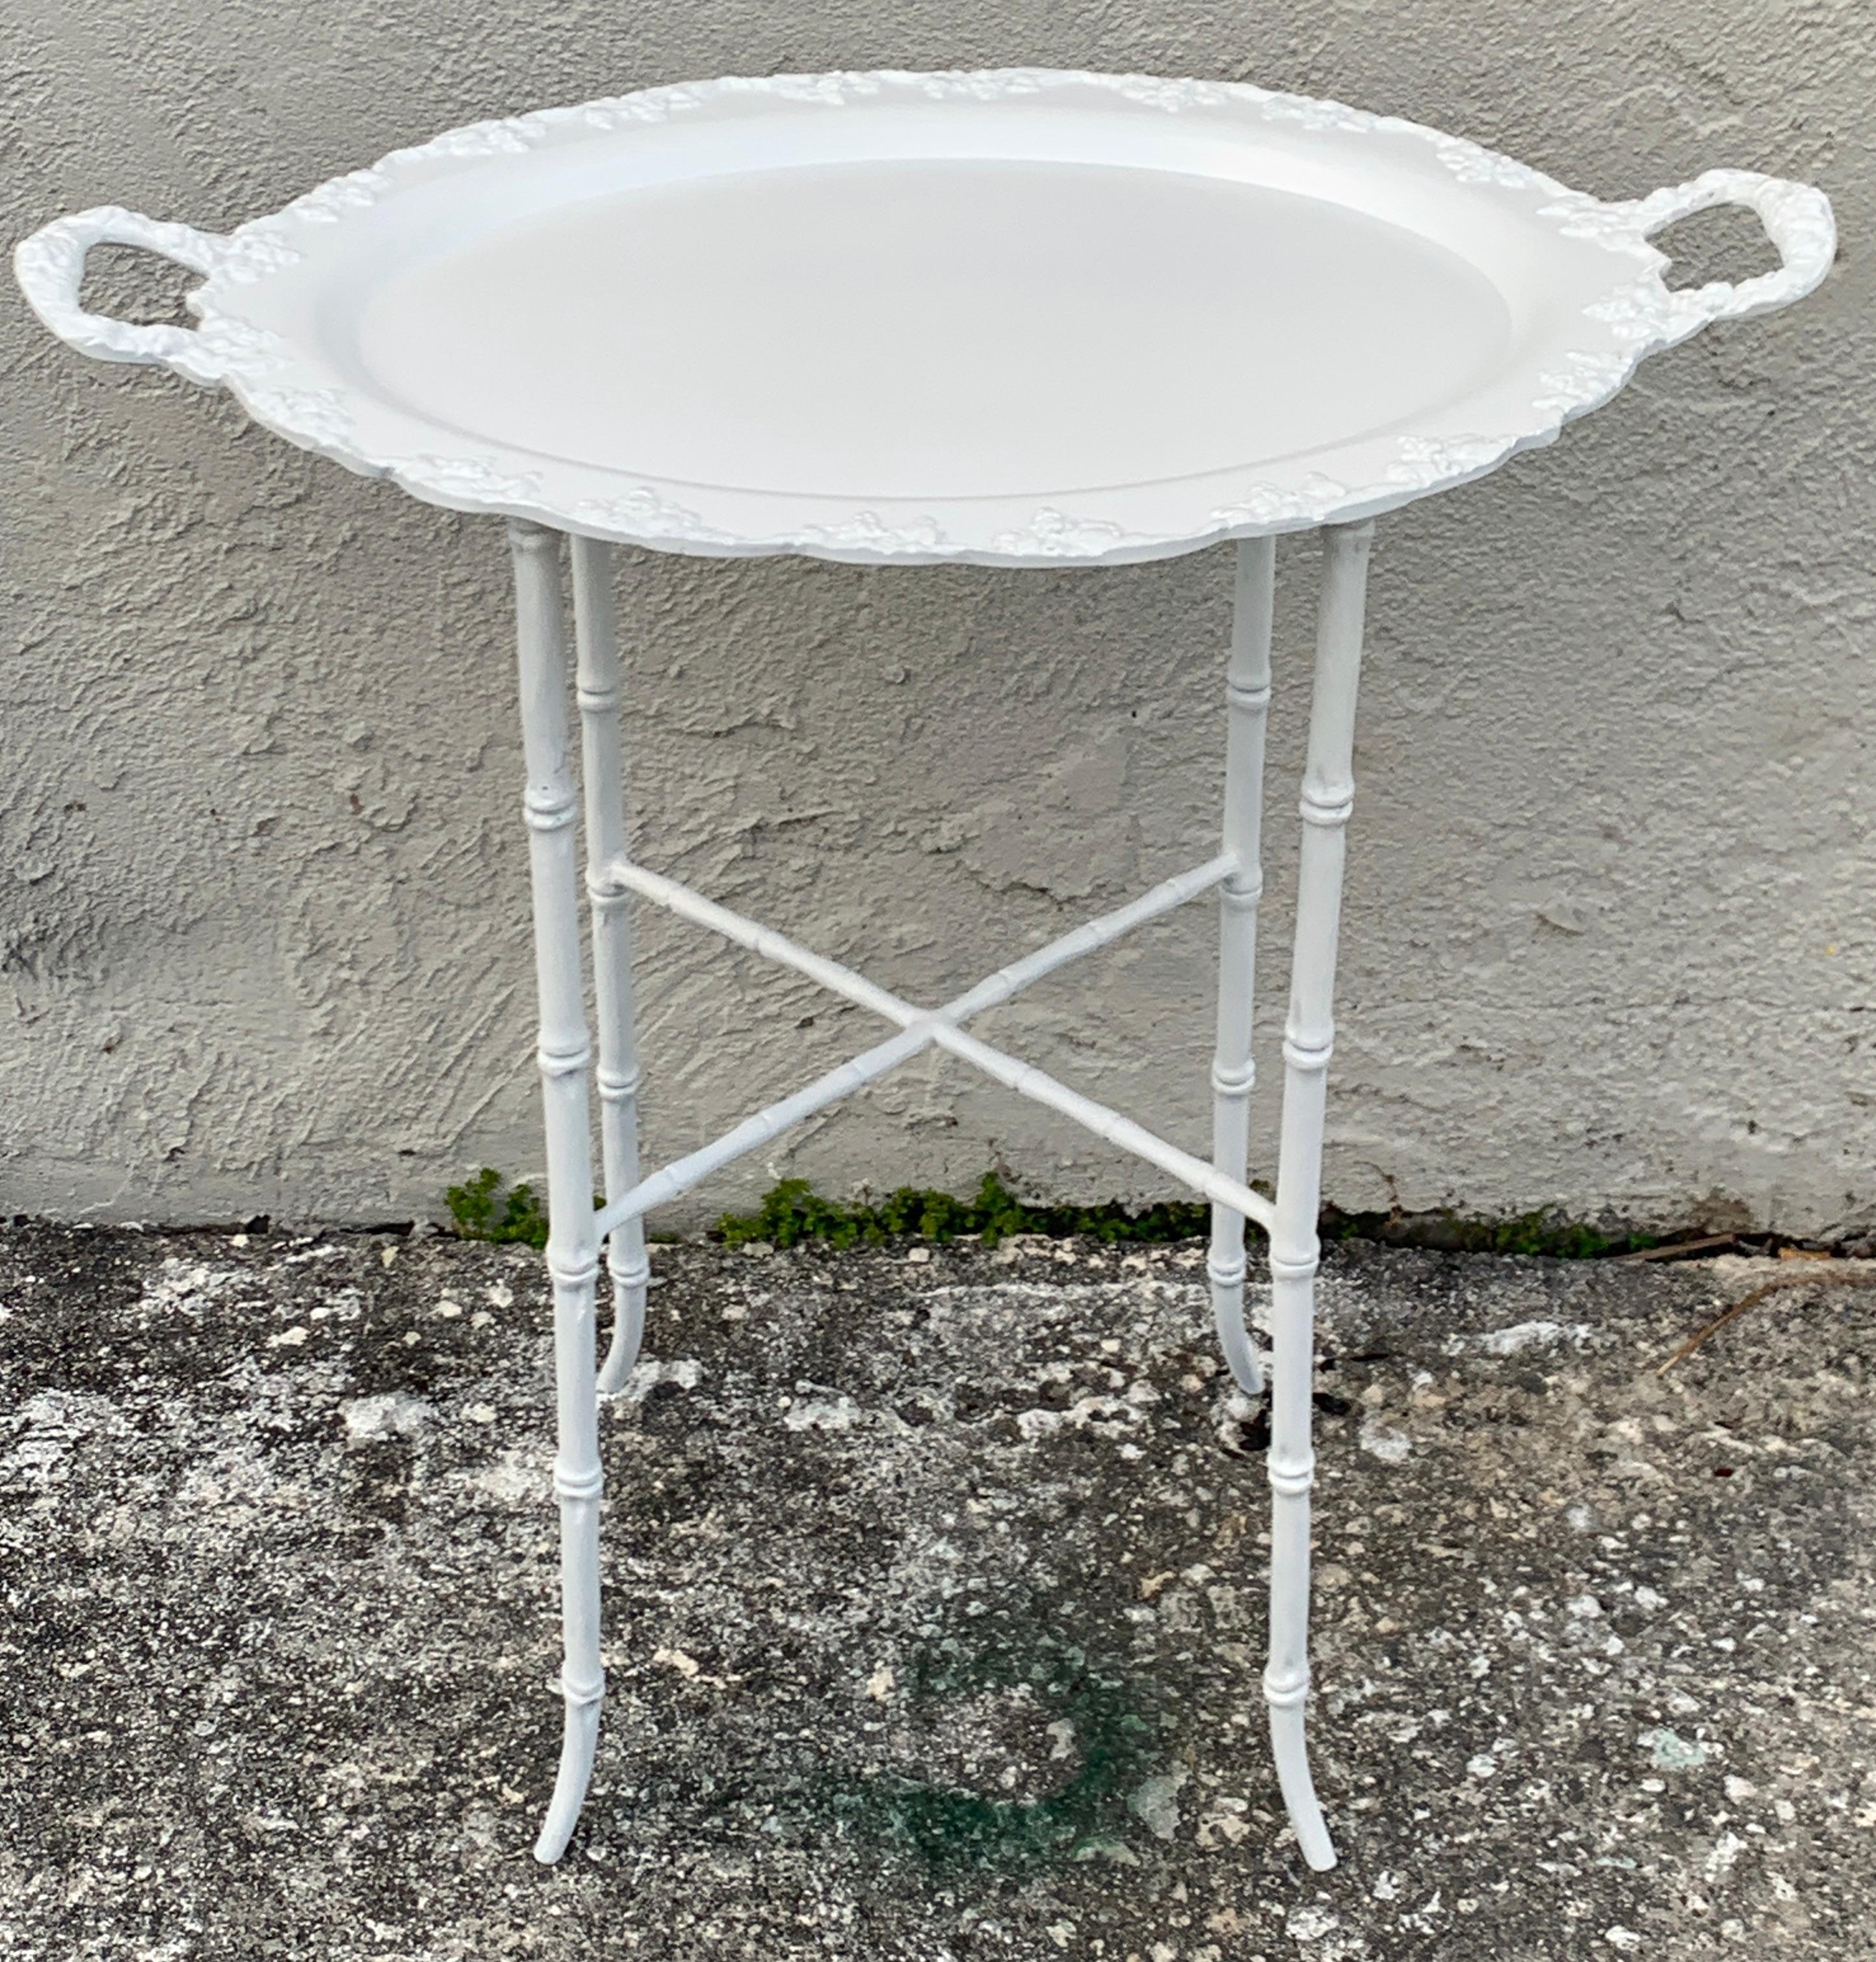 Faux bamboo and grape motif white enameled tray table, Provenance Celine Dion
In two parts, enameled iron 
Base measures 11